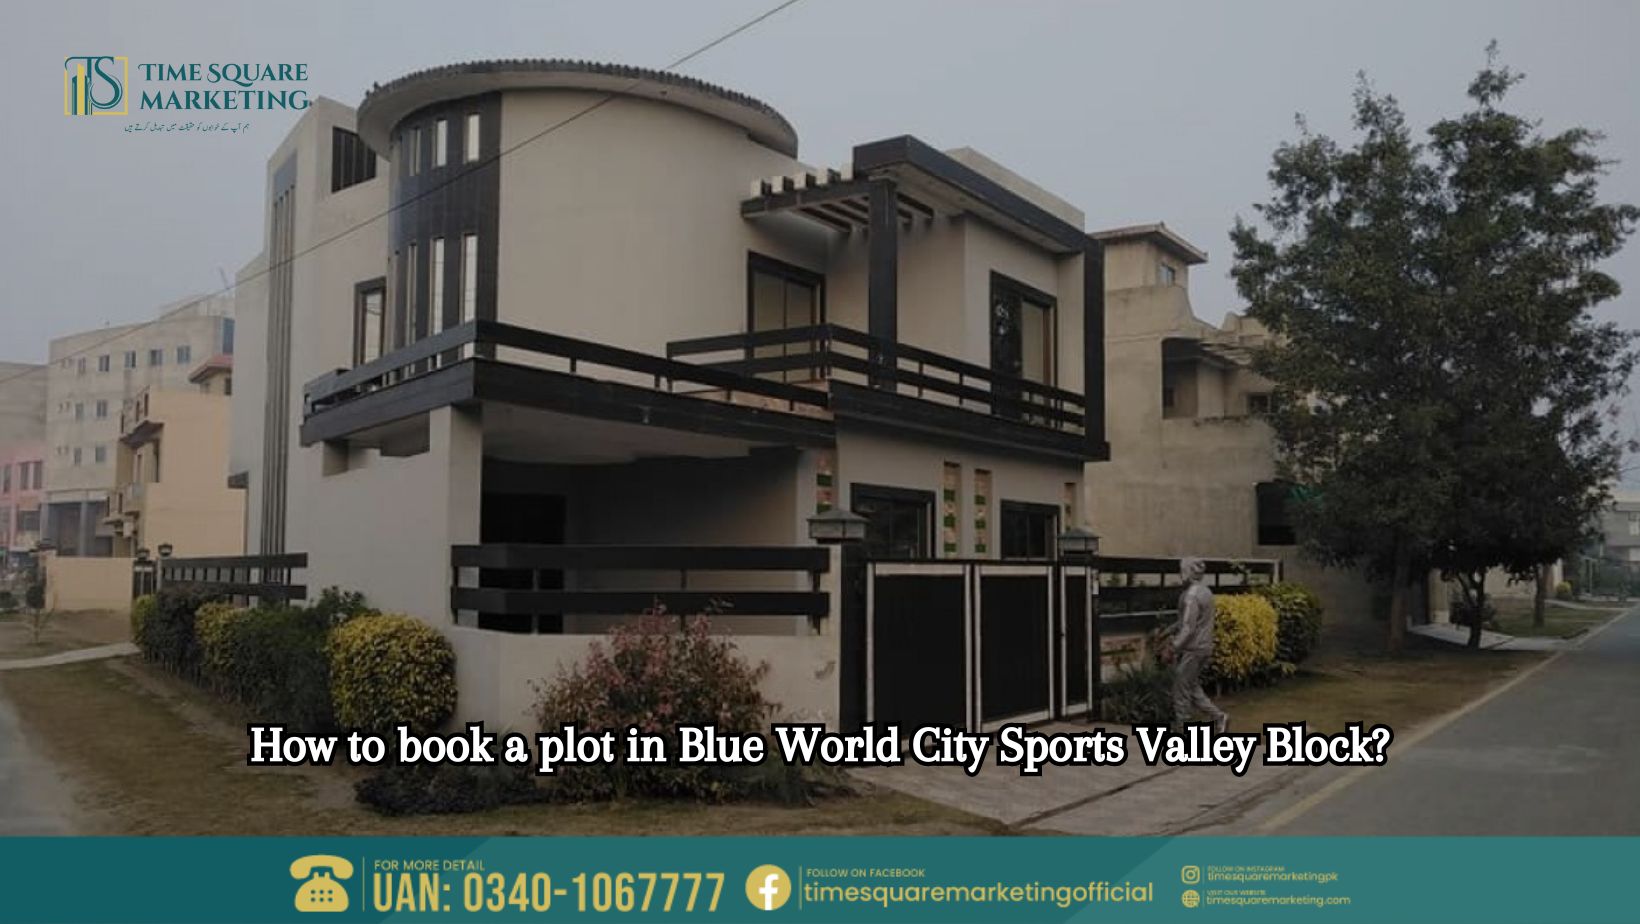 How to book a plot in Blue World City Sports Valley Block